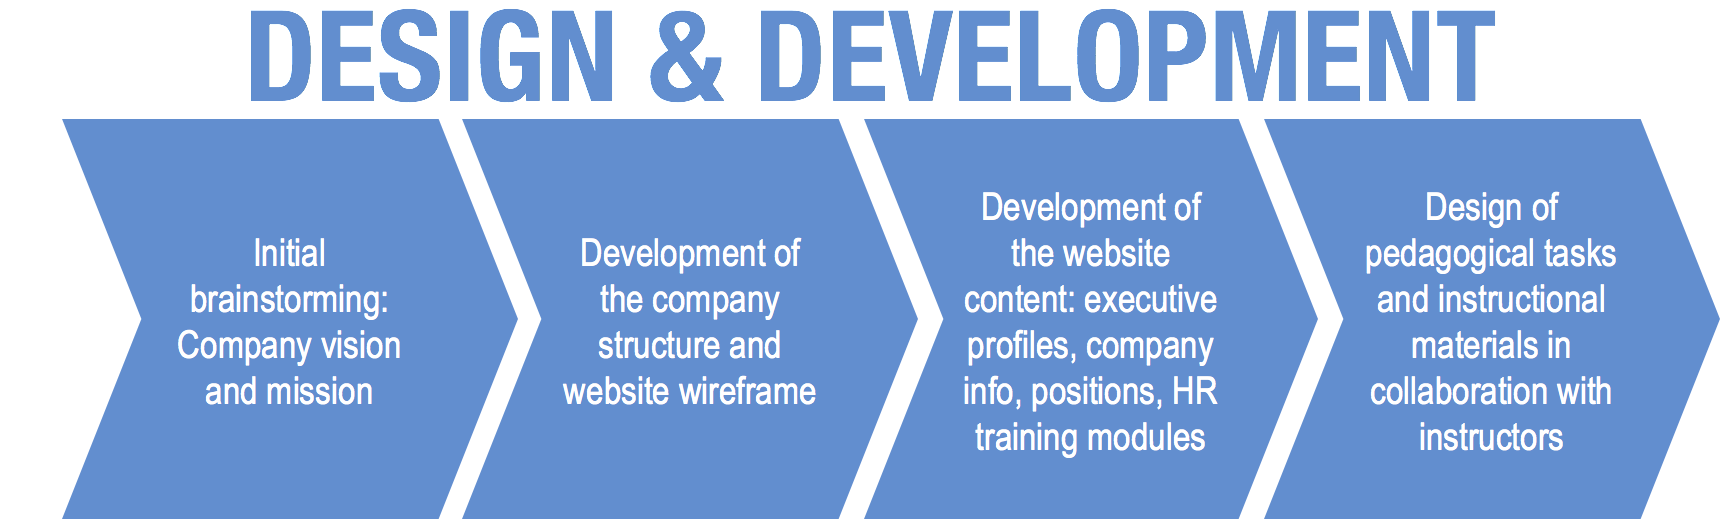 The steps in Design and Development